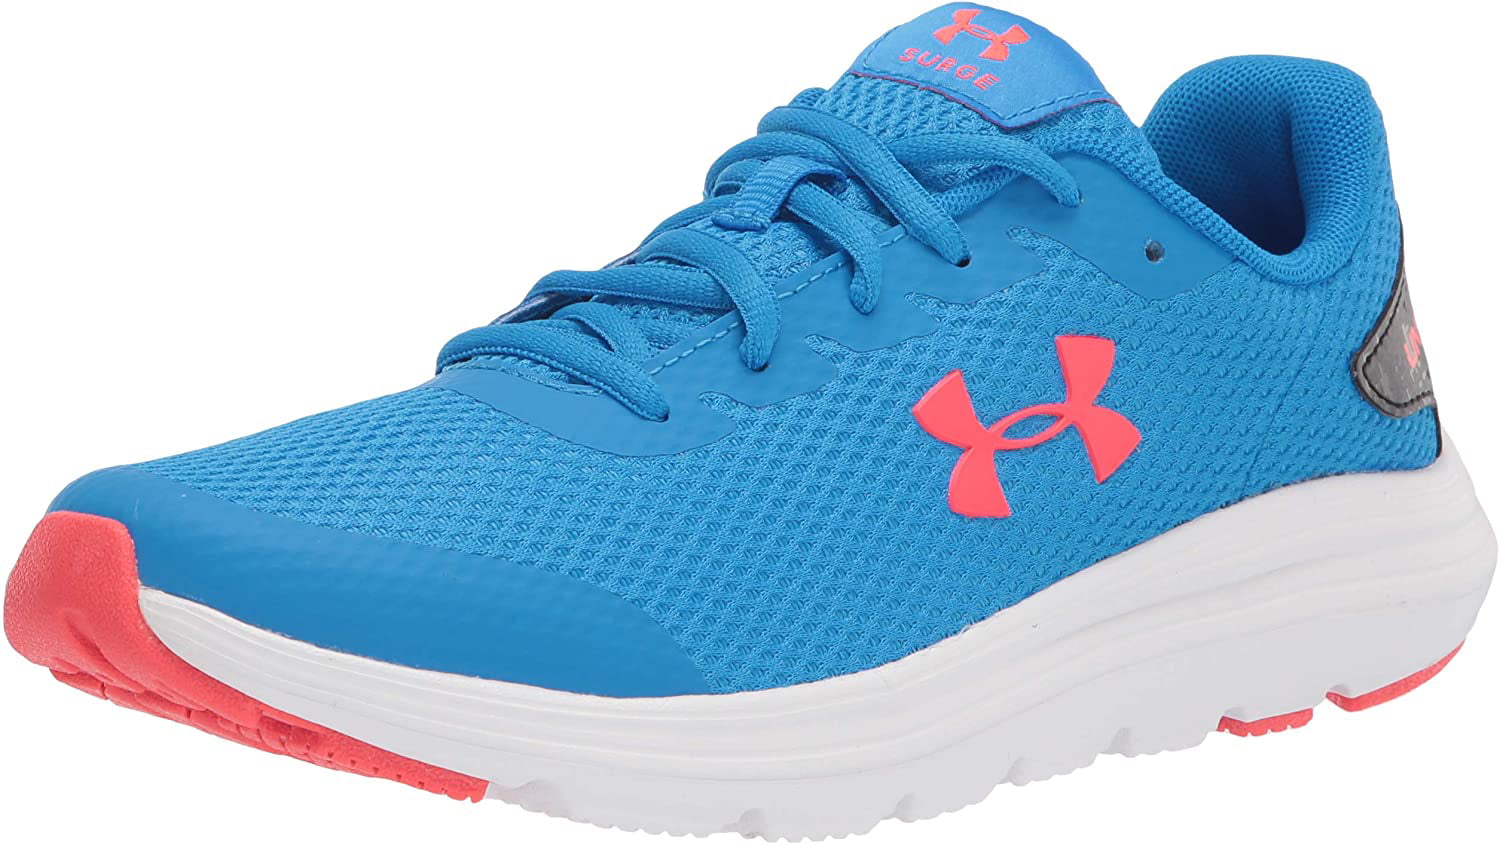 Under Armour GS Surge 2 Youngster Boys Runners 